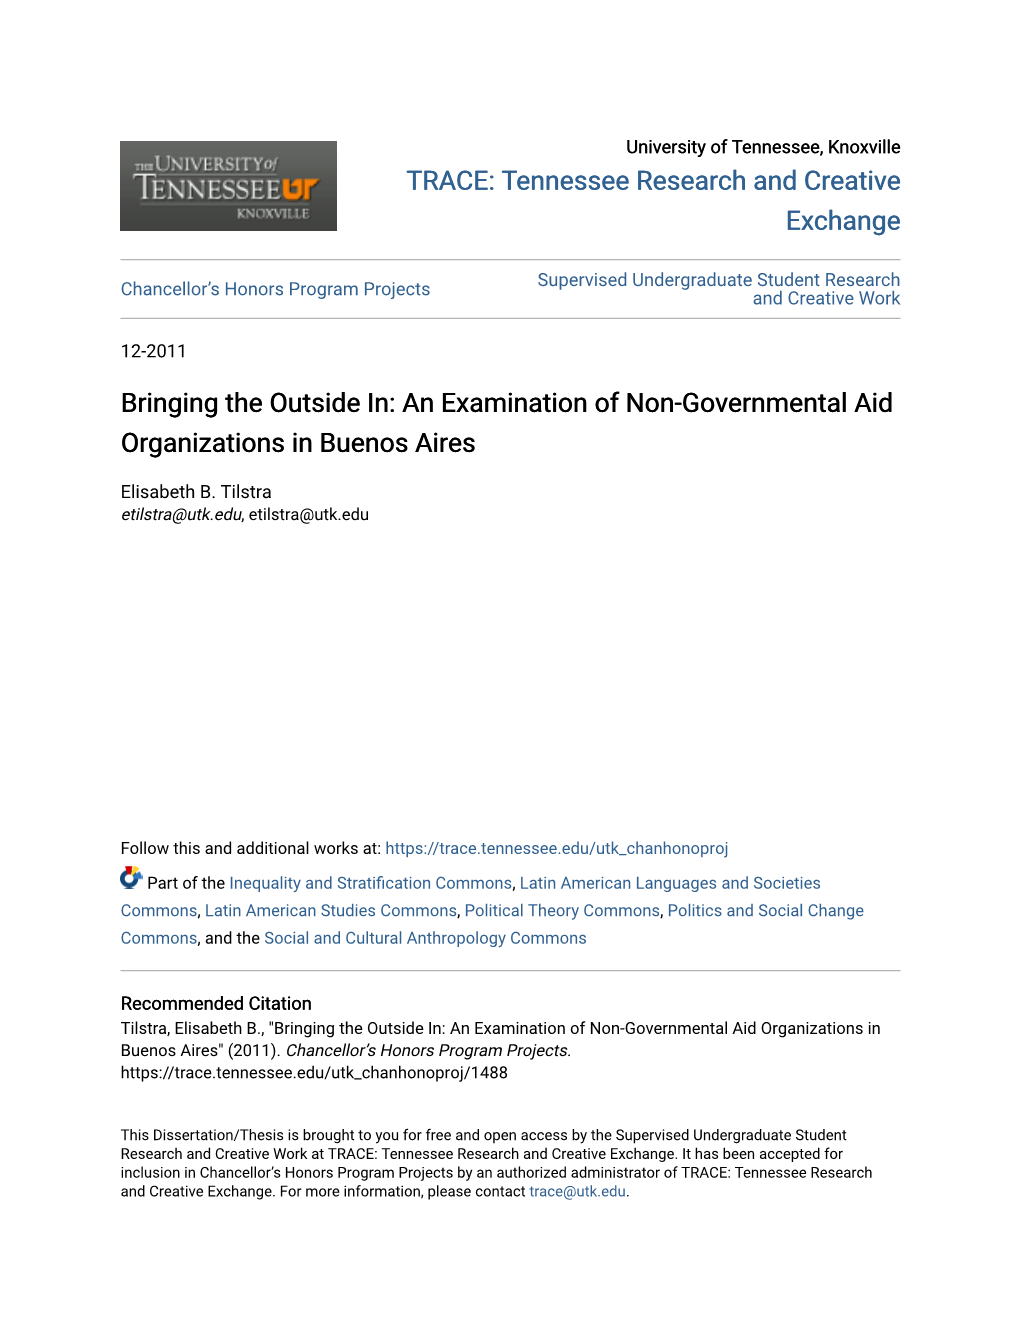 An Examination of Non-Governmental Aid Organizations in Buenos Aires